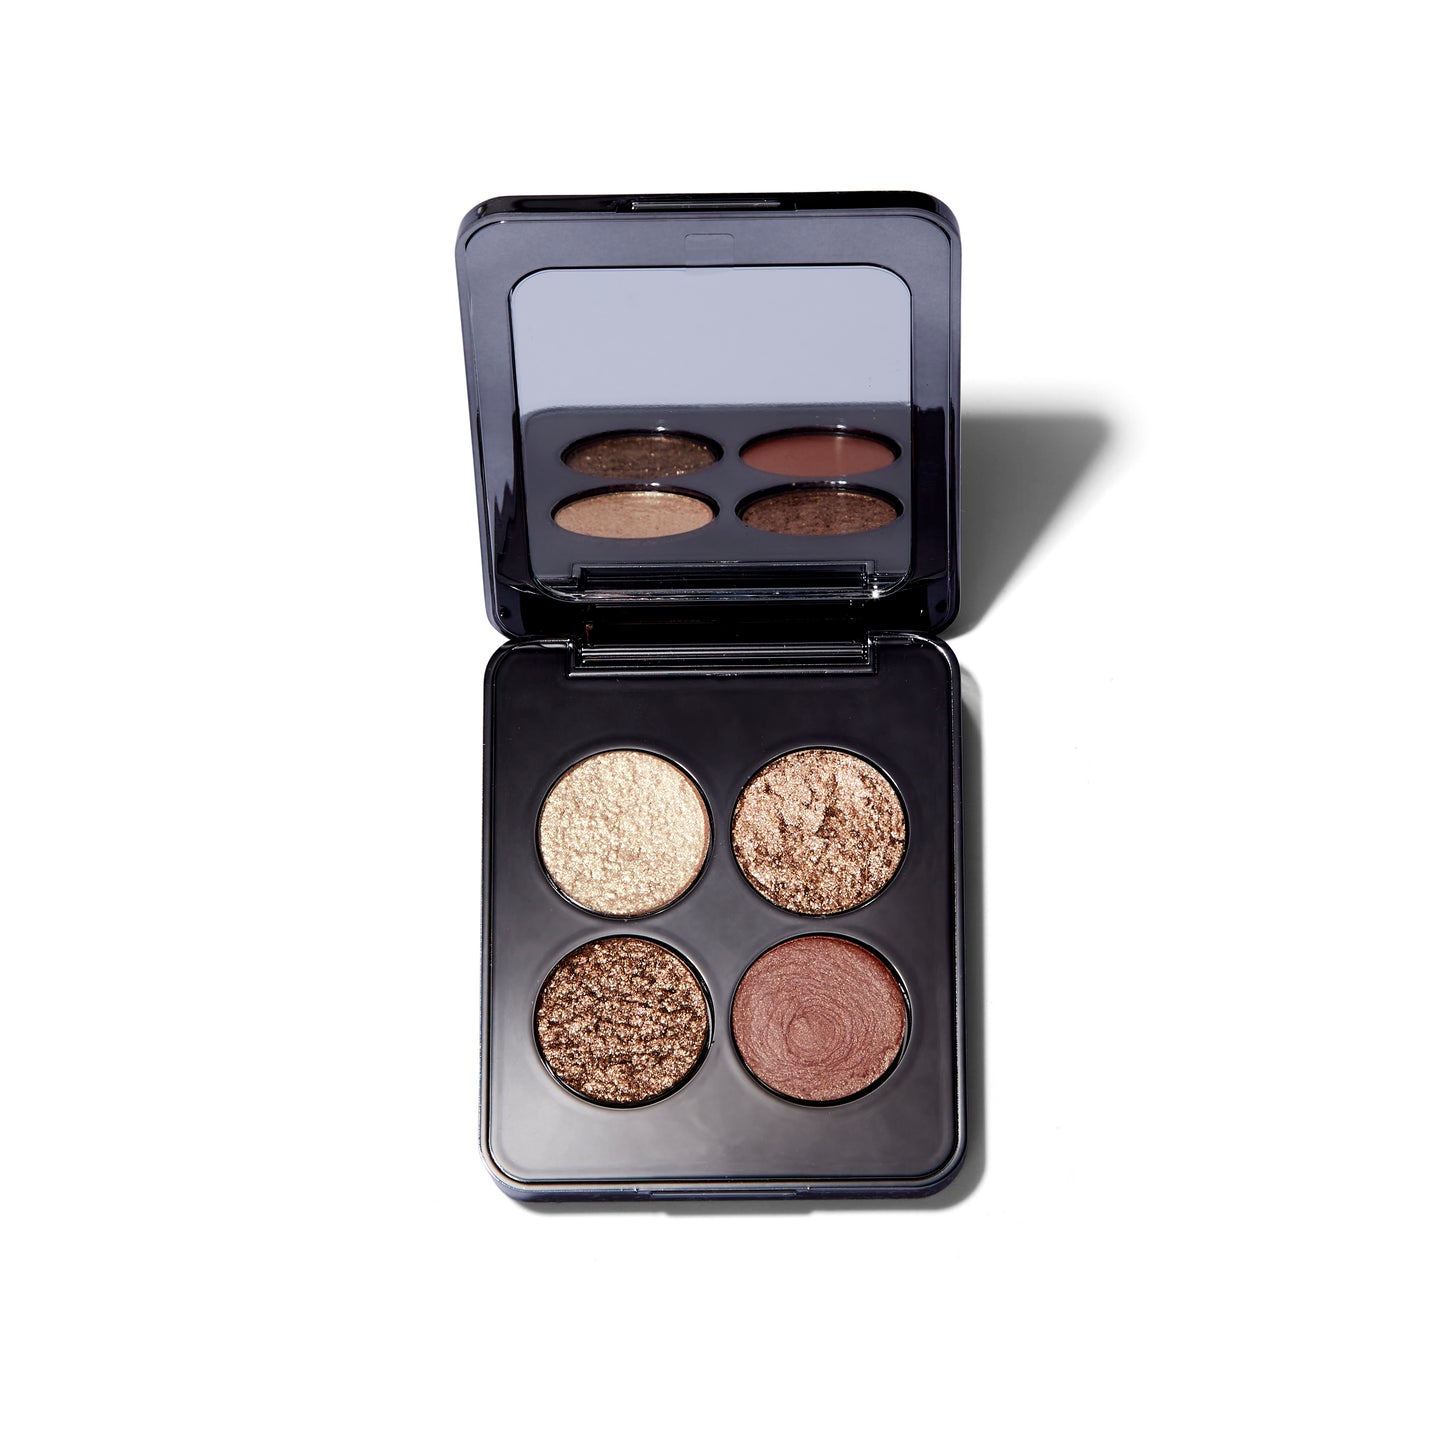 Open palette of the Roen Eyeshadow Palette in 75  Degrees Warm. The palette is open and the four metallic, bronze shades are also visible in the mirror.  